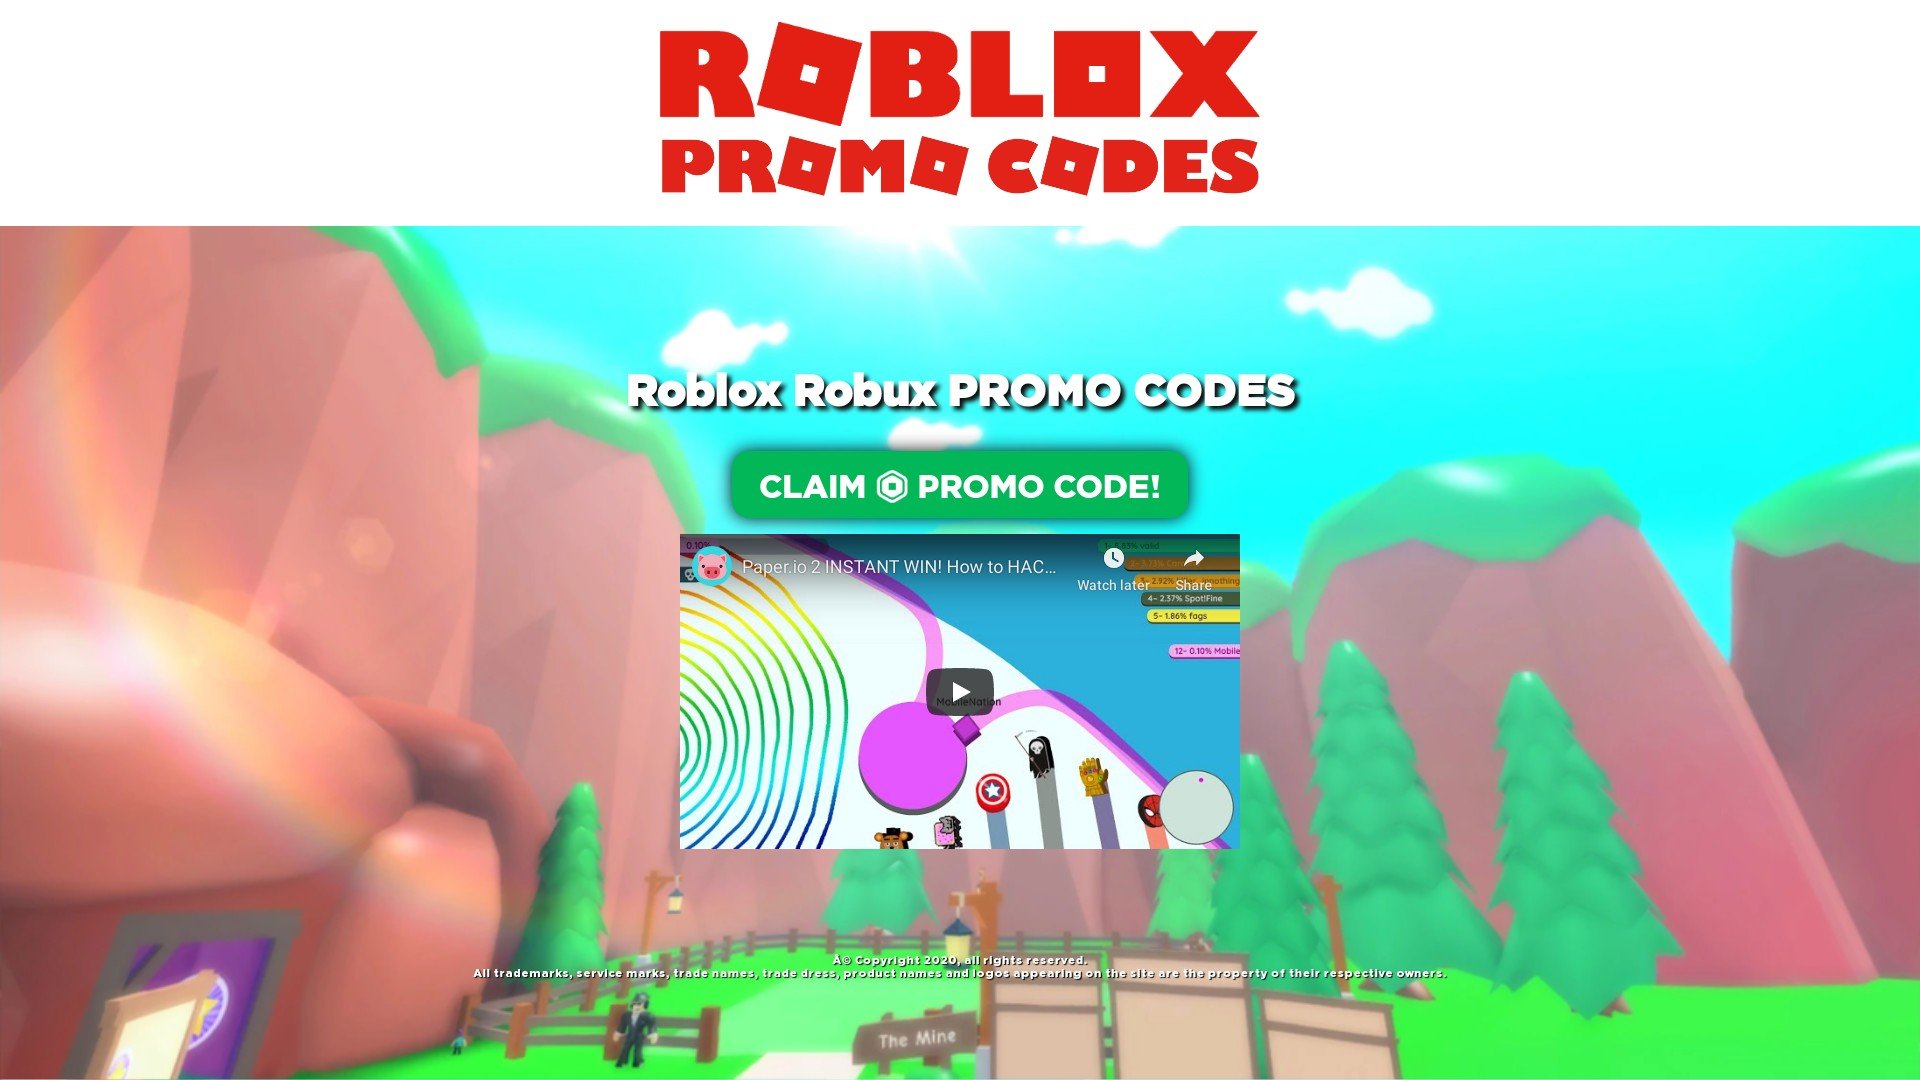 How To Get Robux For Free Promo Codes